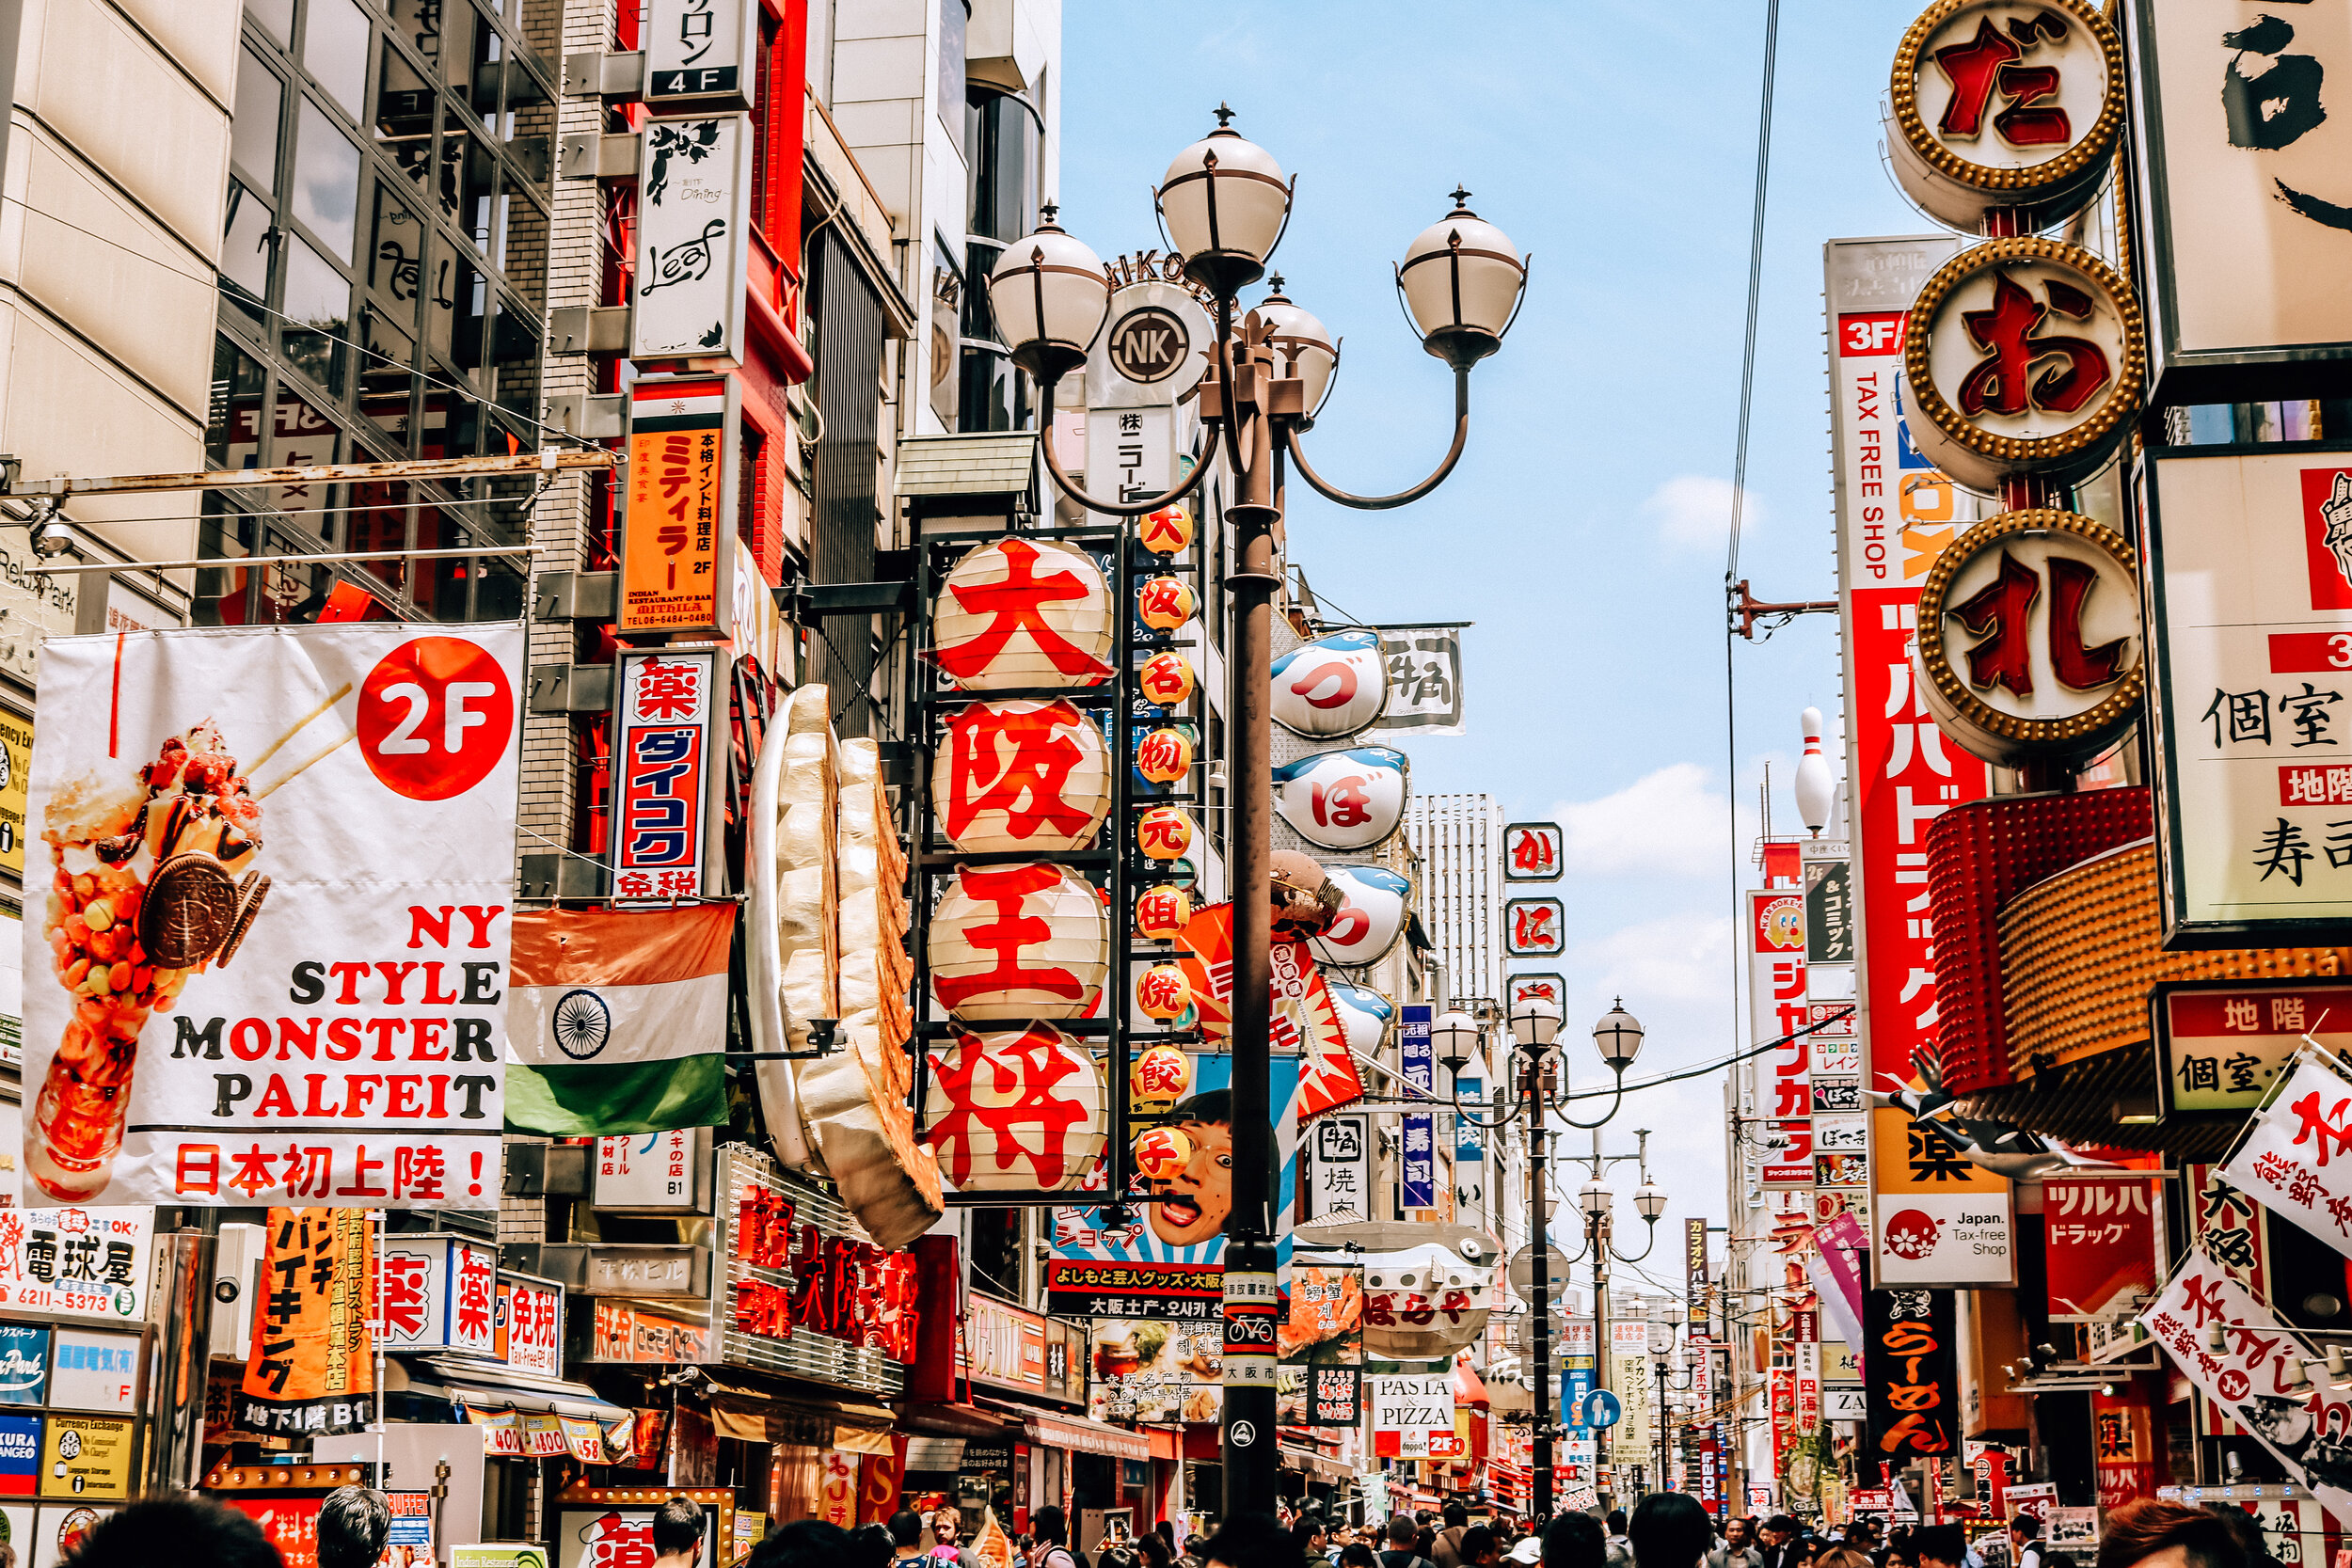 Many colorful signs on buildings lining the busy streets of Japan